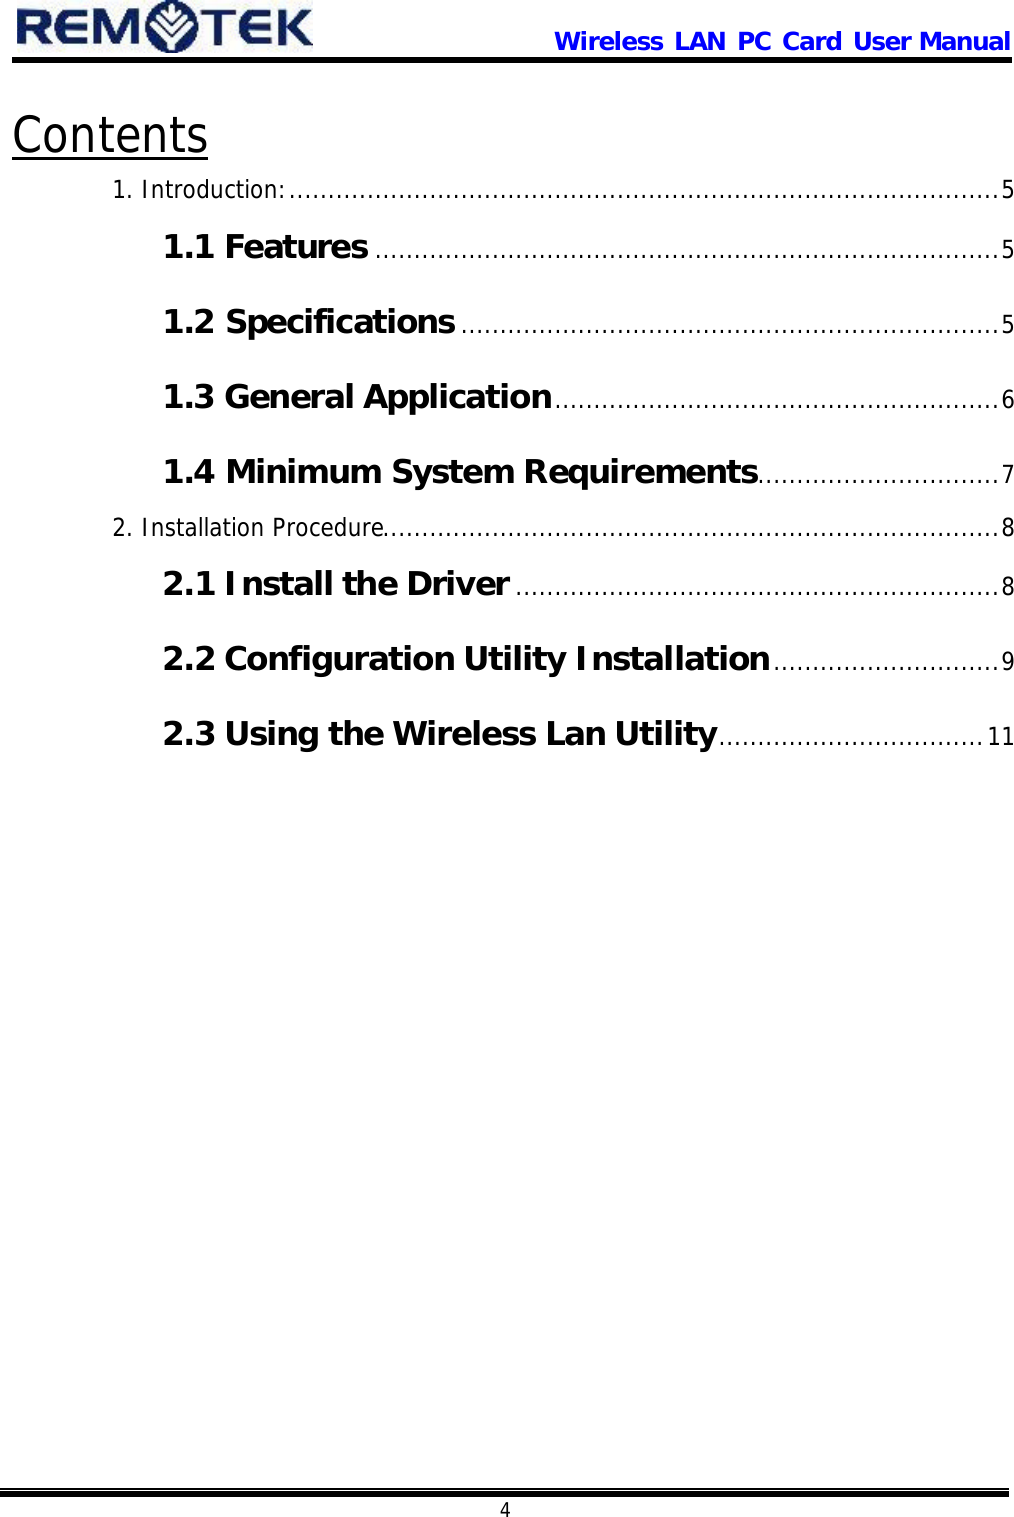                      Wireless LAN PC Card User Manual            4  Contents 1. Introduction:...........................................................................................5 1.1 Features ................................................................................5 1.2 Specifications.....................................................................5 1.3 General Application.........................................................6 1.4 Minimum System Requirements...............................7 2. Installation Procedure...............................................................................8 2.1 Install the Driver..............................................................8 2.2 Configuration Utility Installation.............................9 2.3 Using the Wireless Lan Utility..................................11   